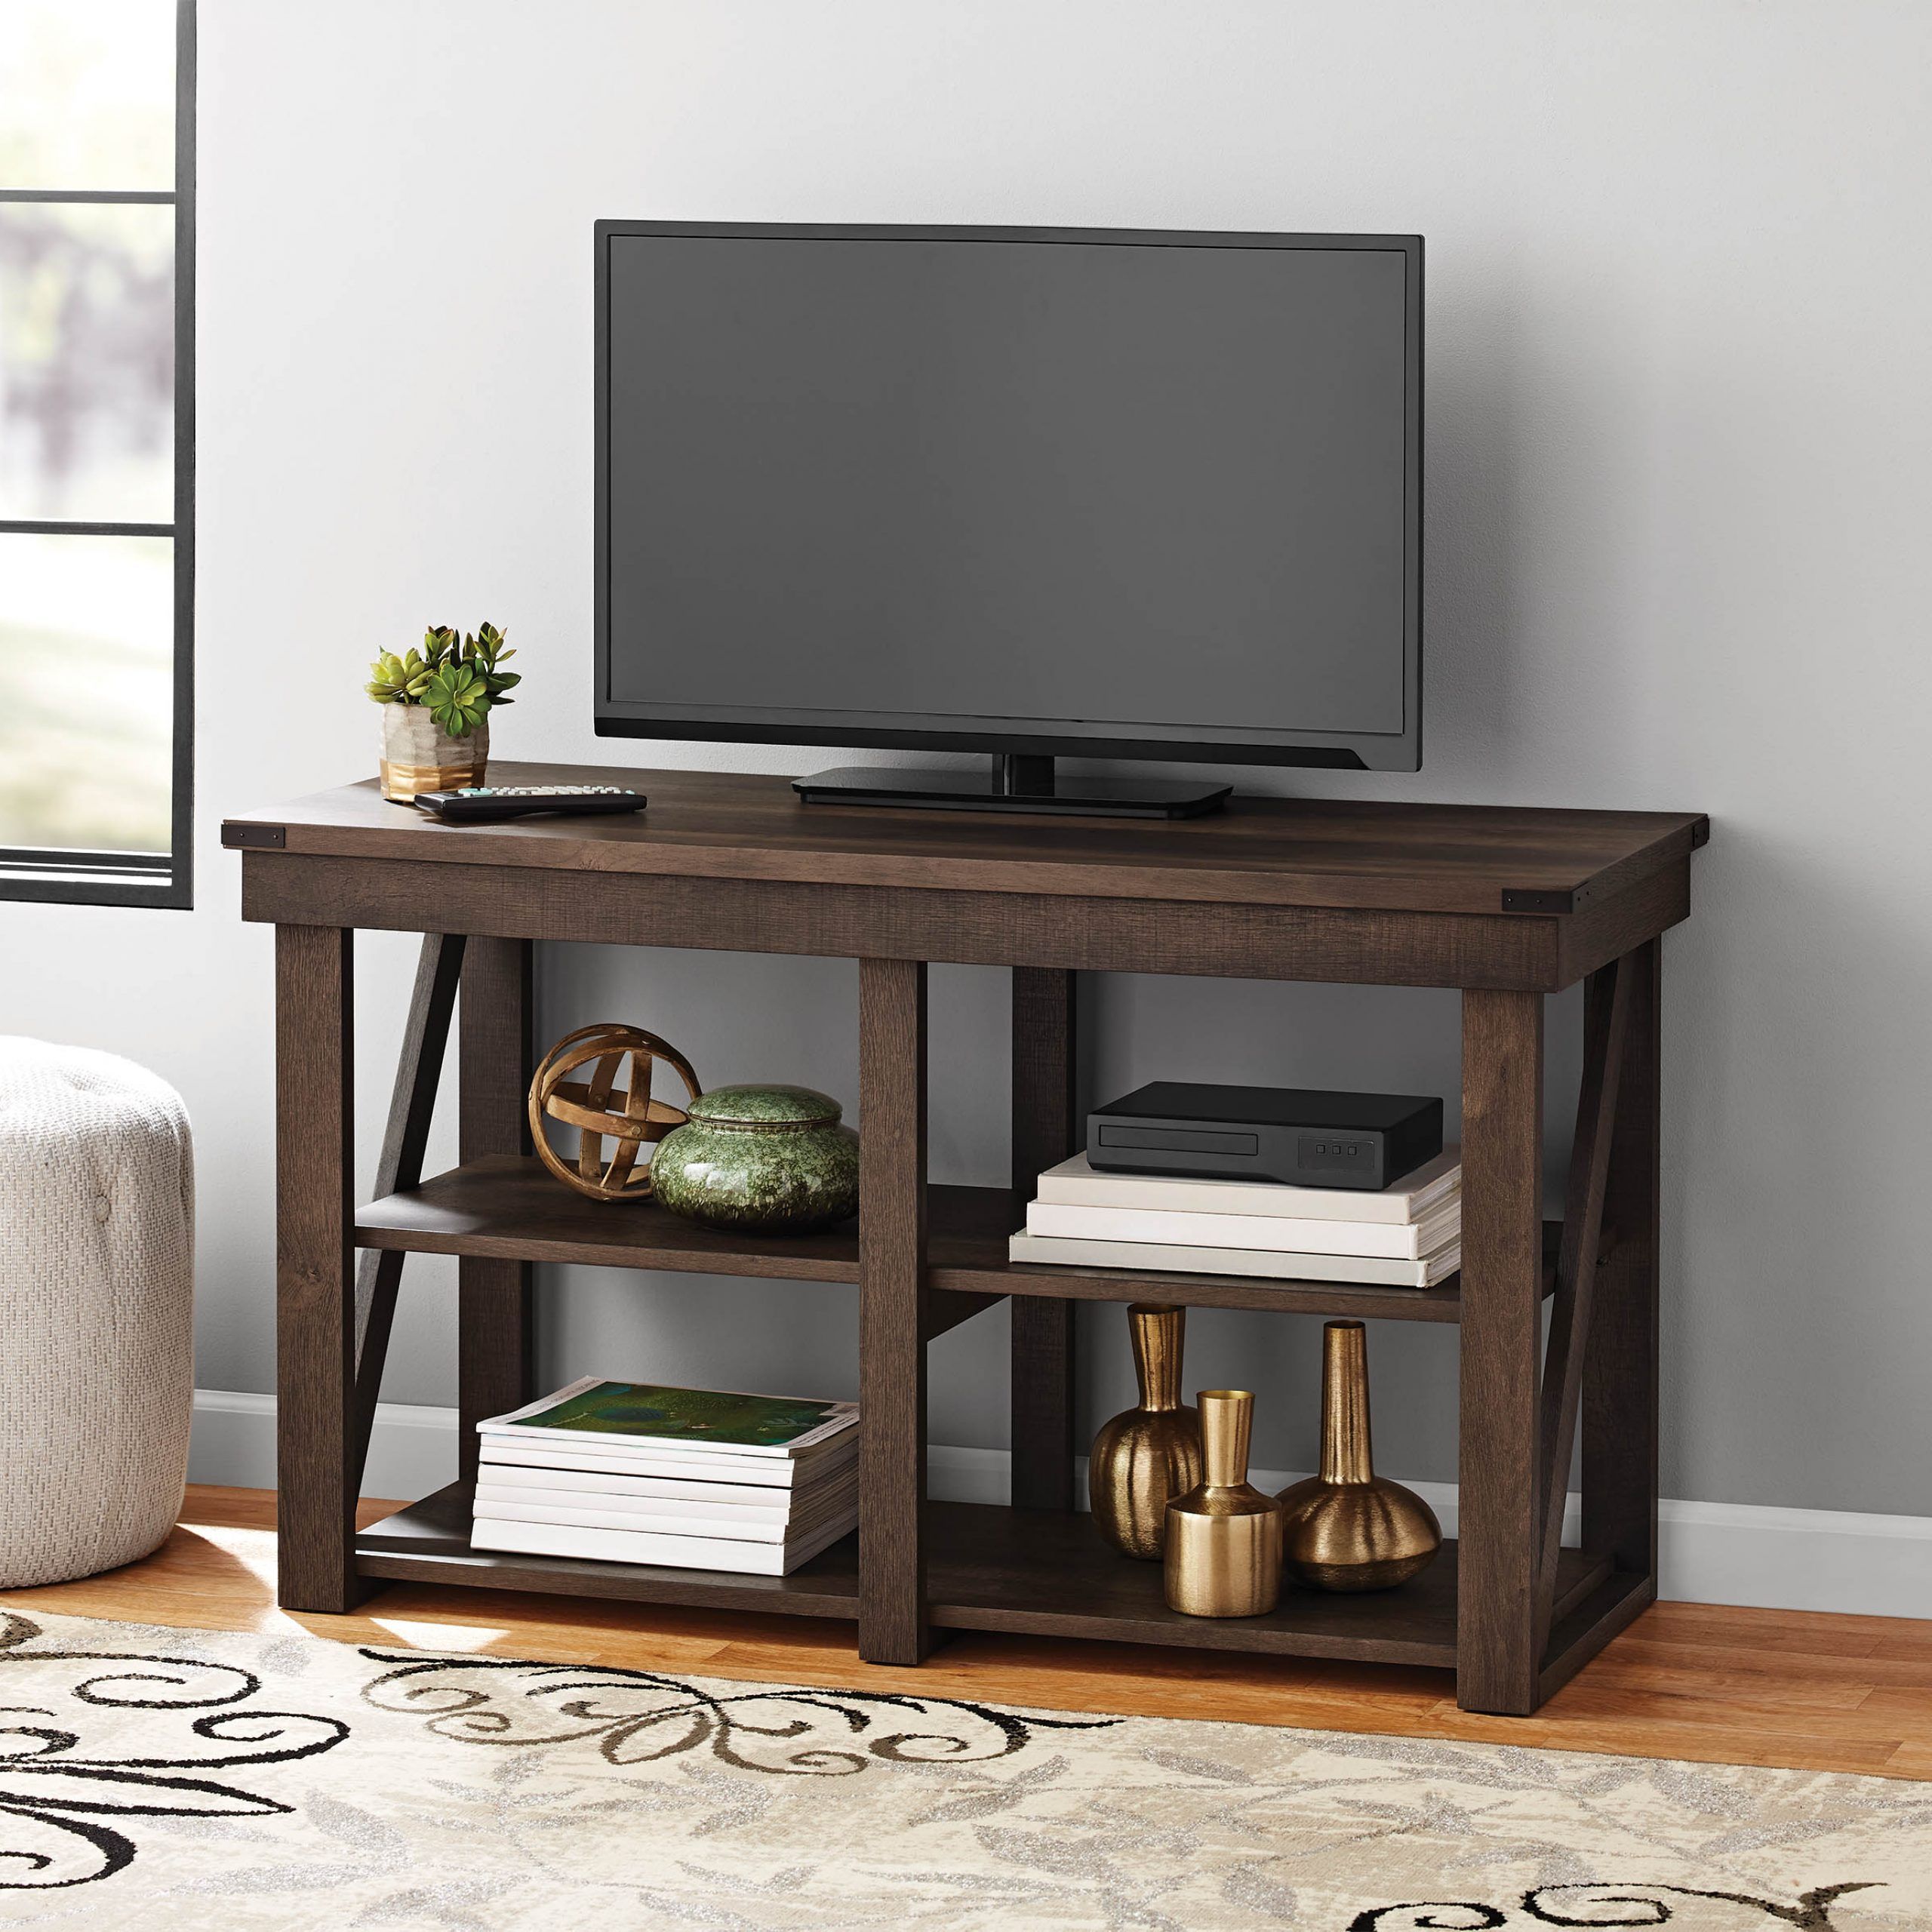 Mainstays Lawson Tv Stand For Tvs Up To 55", Espresso Throughout Lansing Tv Stands For Tvs Up To 55&quot; (View 6 of 15)